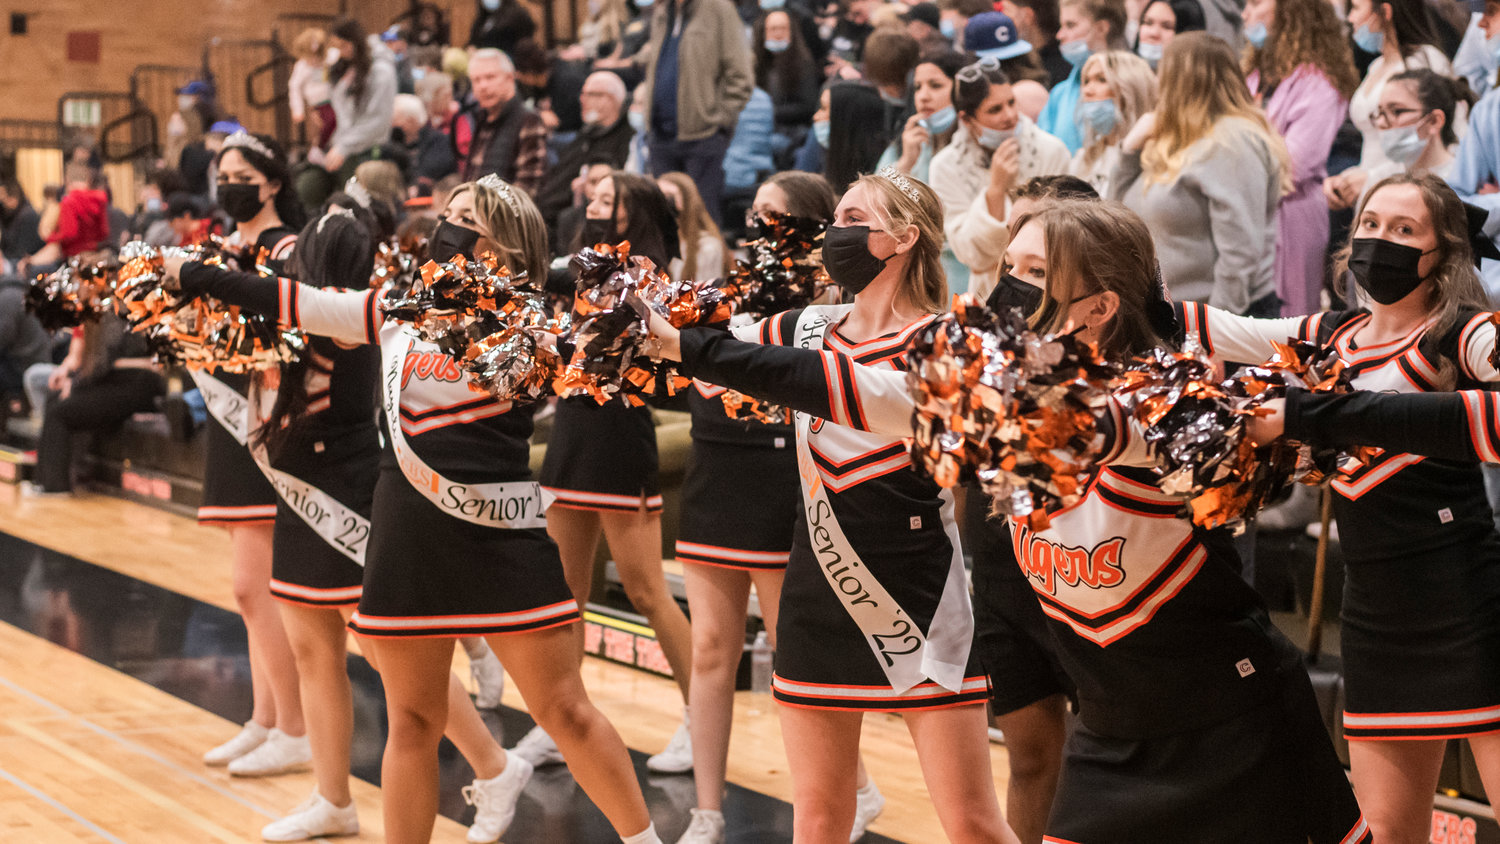 Seniors sport sashes and tiaras while cheering for Tigers courtside during a boys basketball game Friday night at Centralia High School.